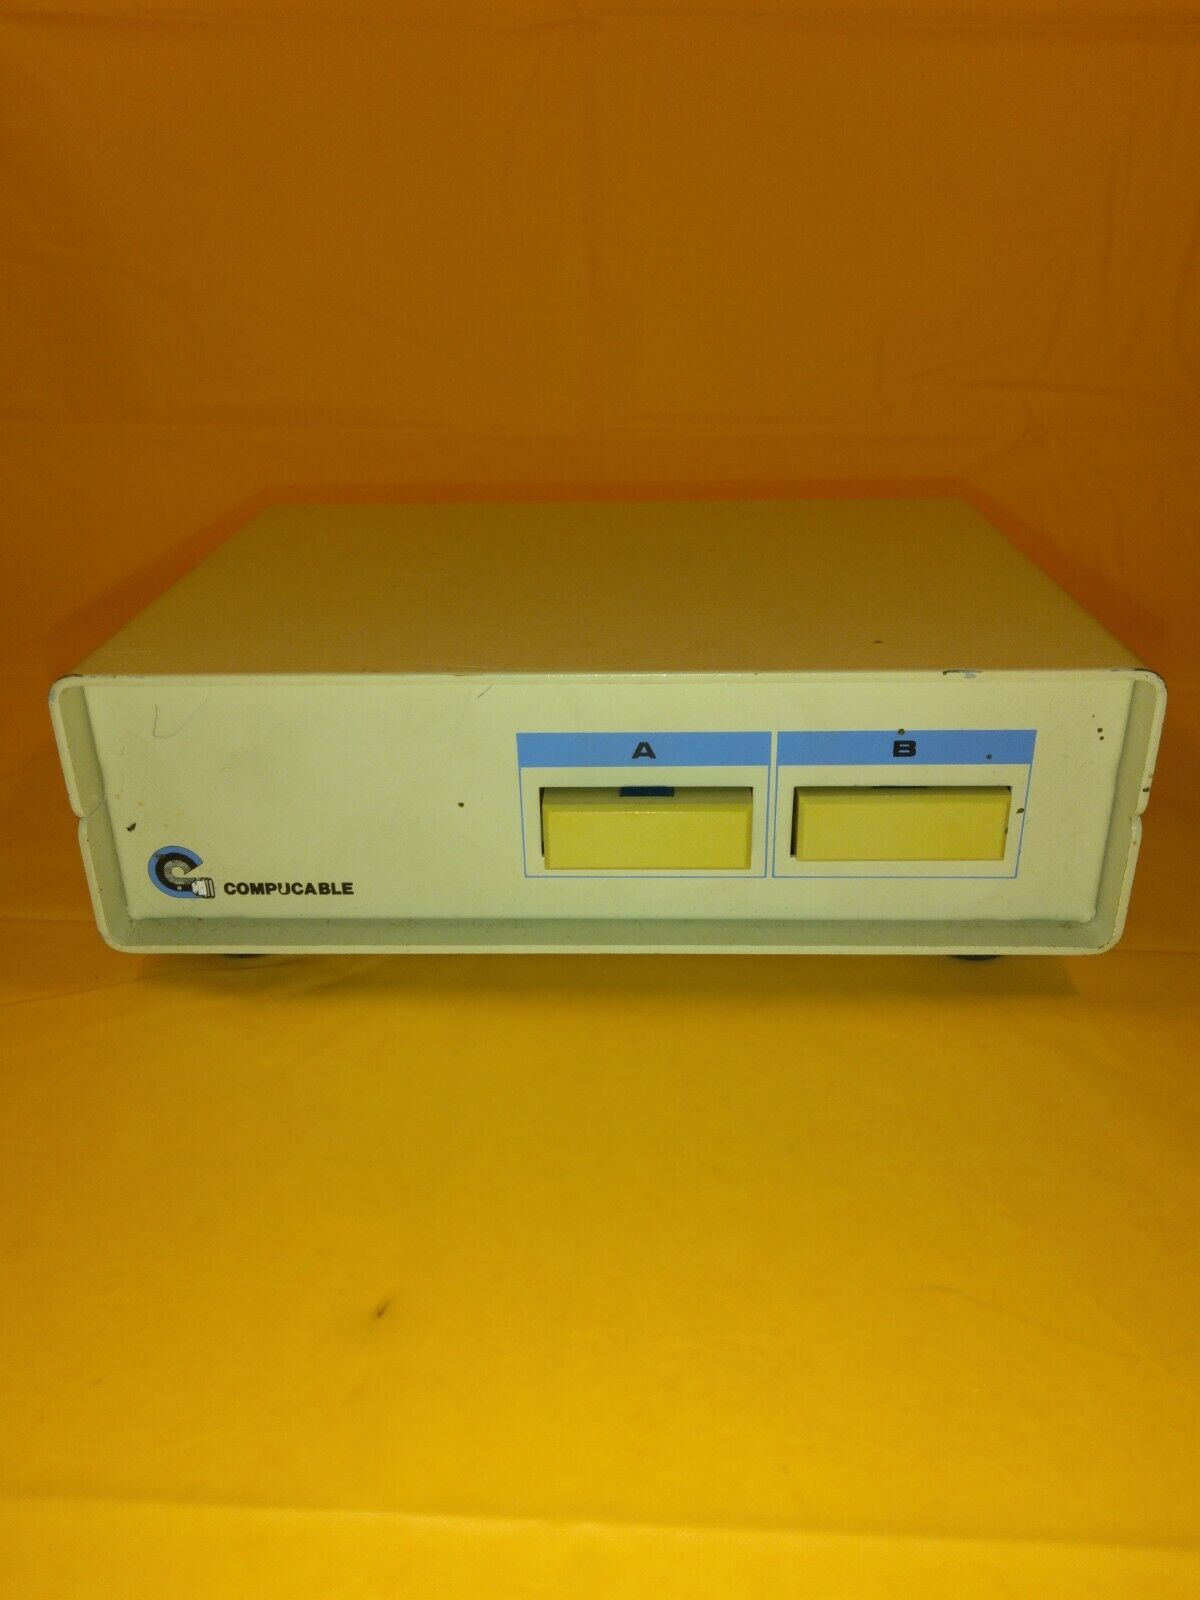 Vintage Compucable Data Switch 2 Channel (A & B)